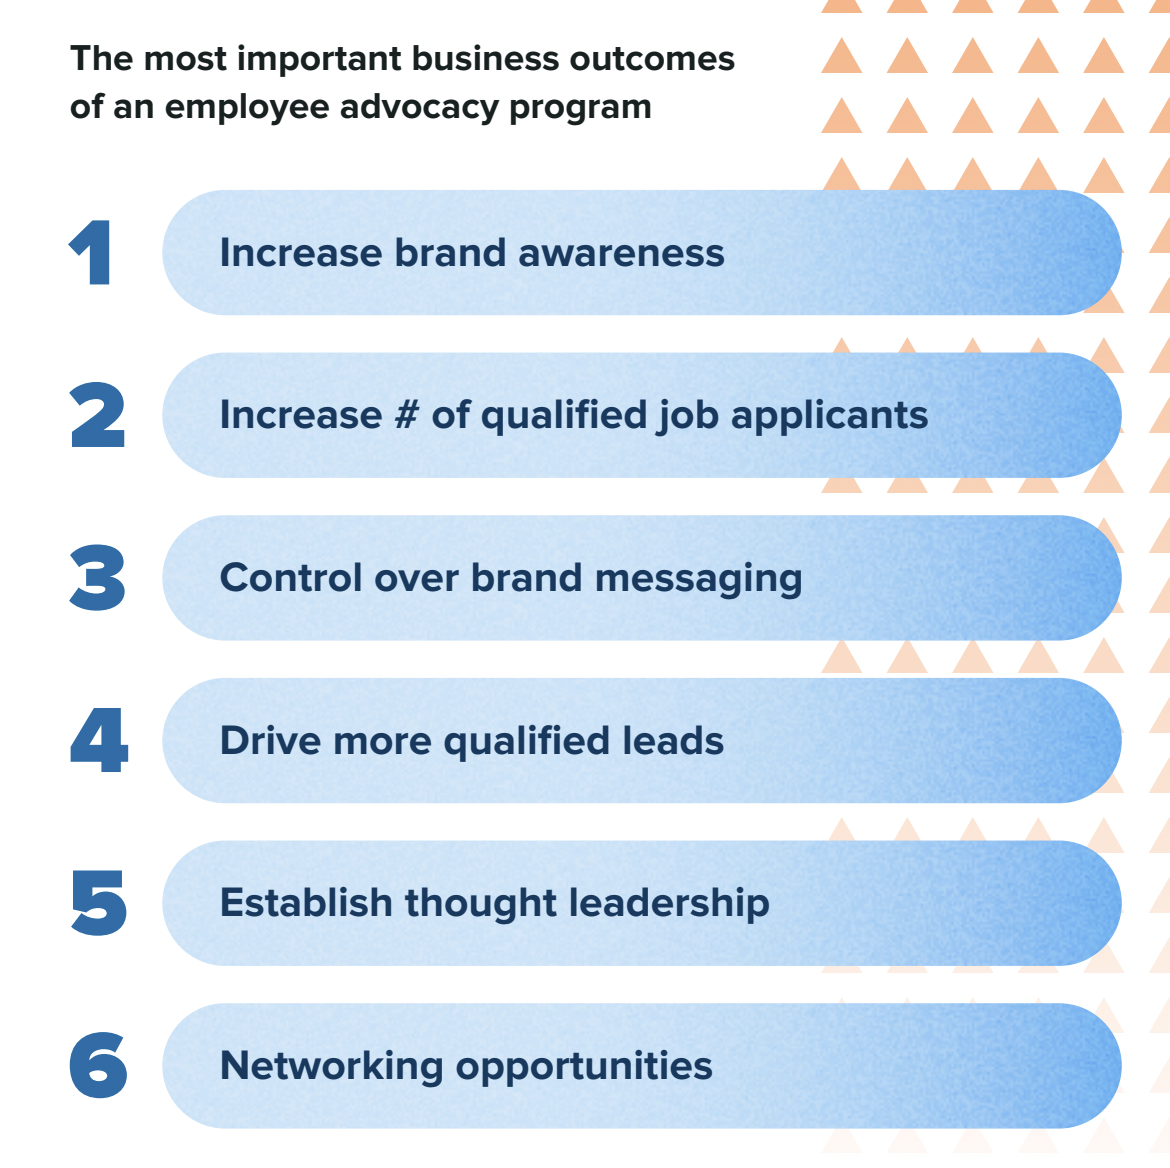 A graphic from the Sprout Social Index depicting the most important business outcomes of an employee advocacy program